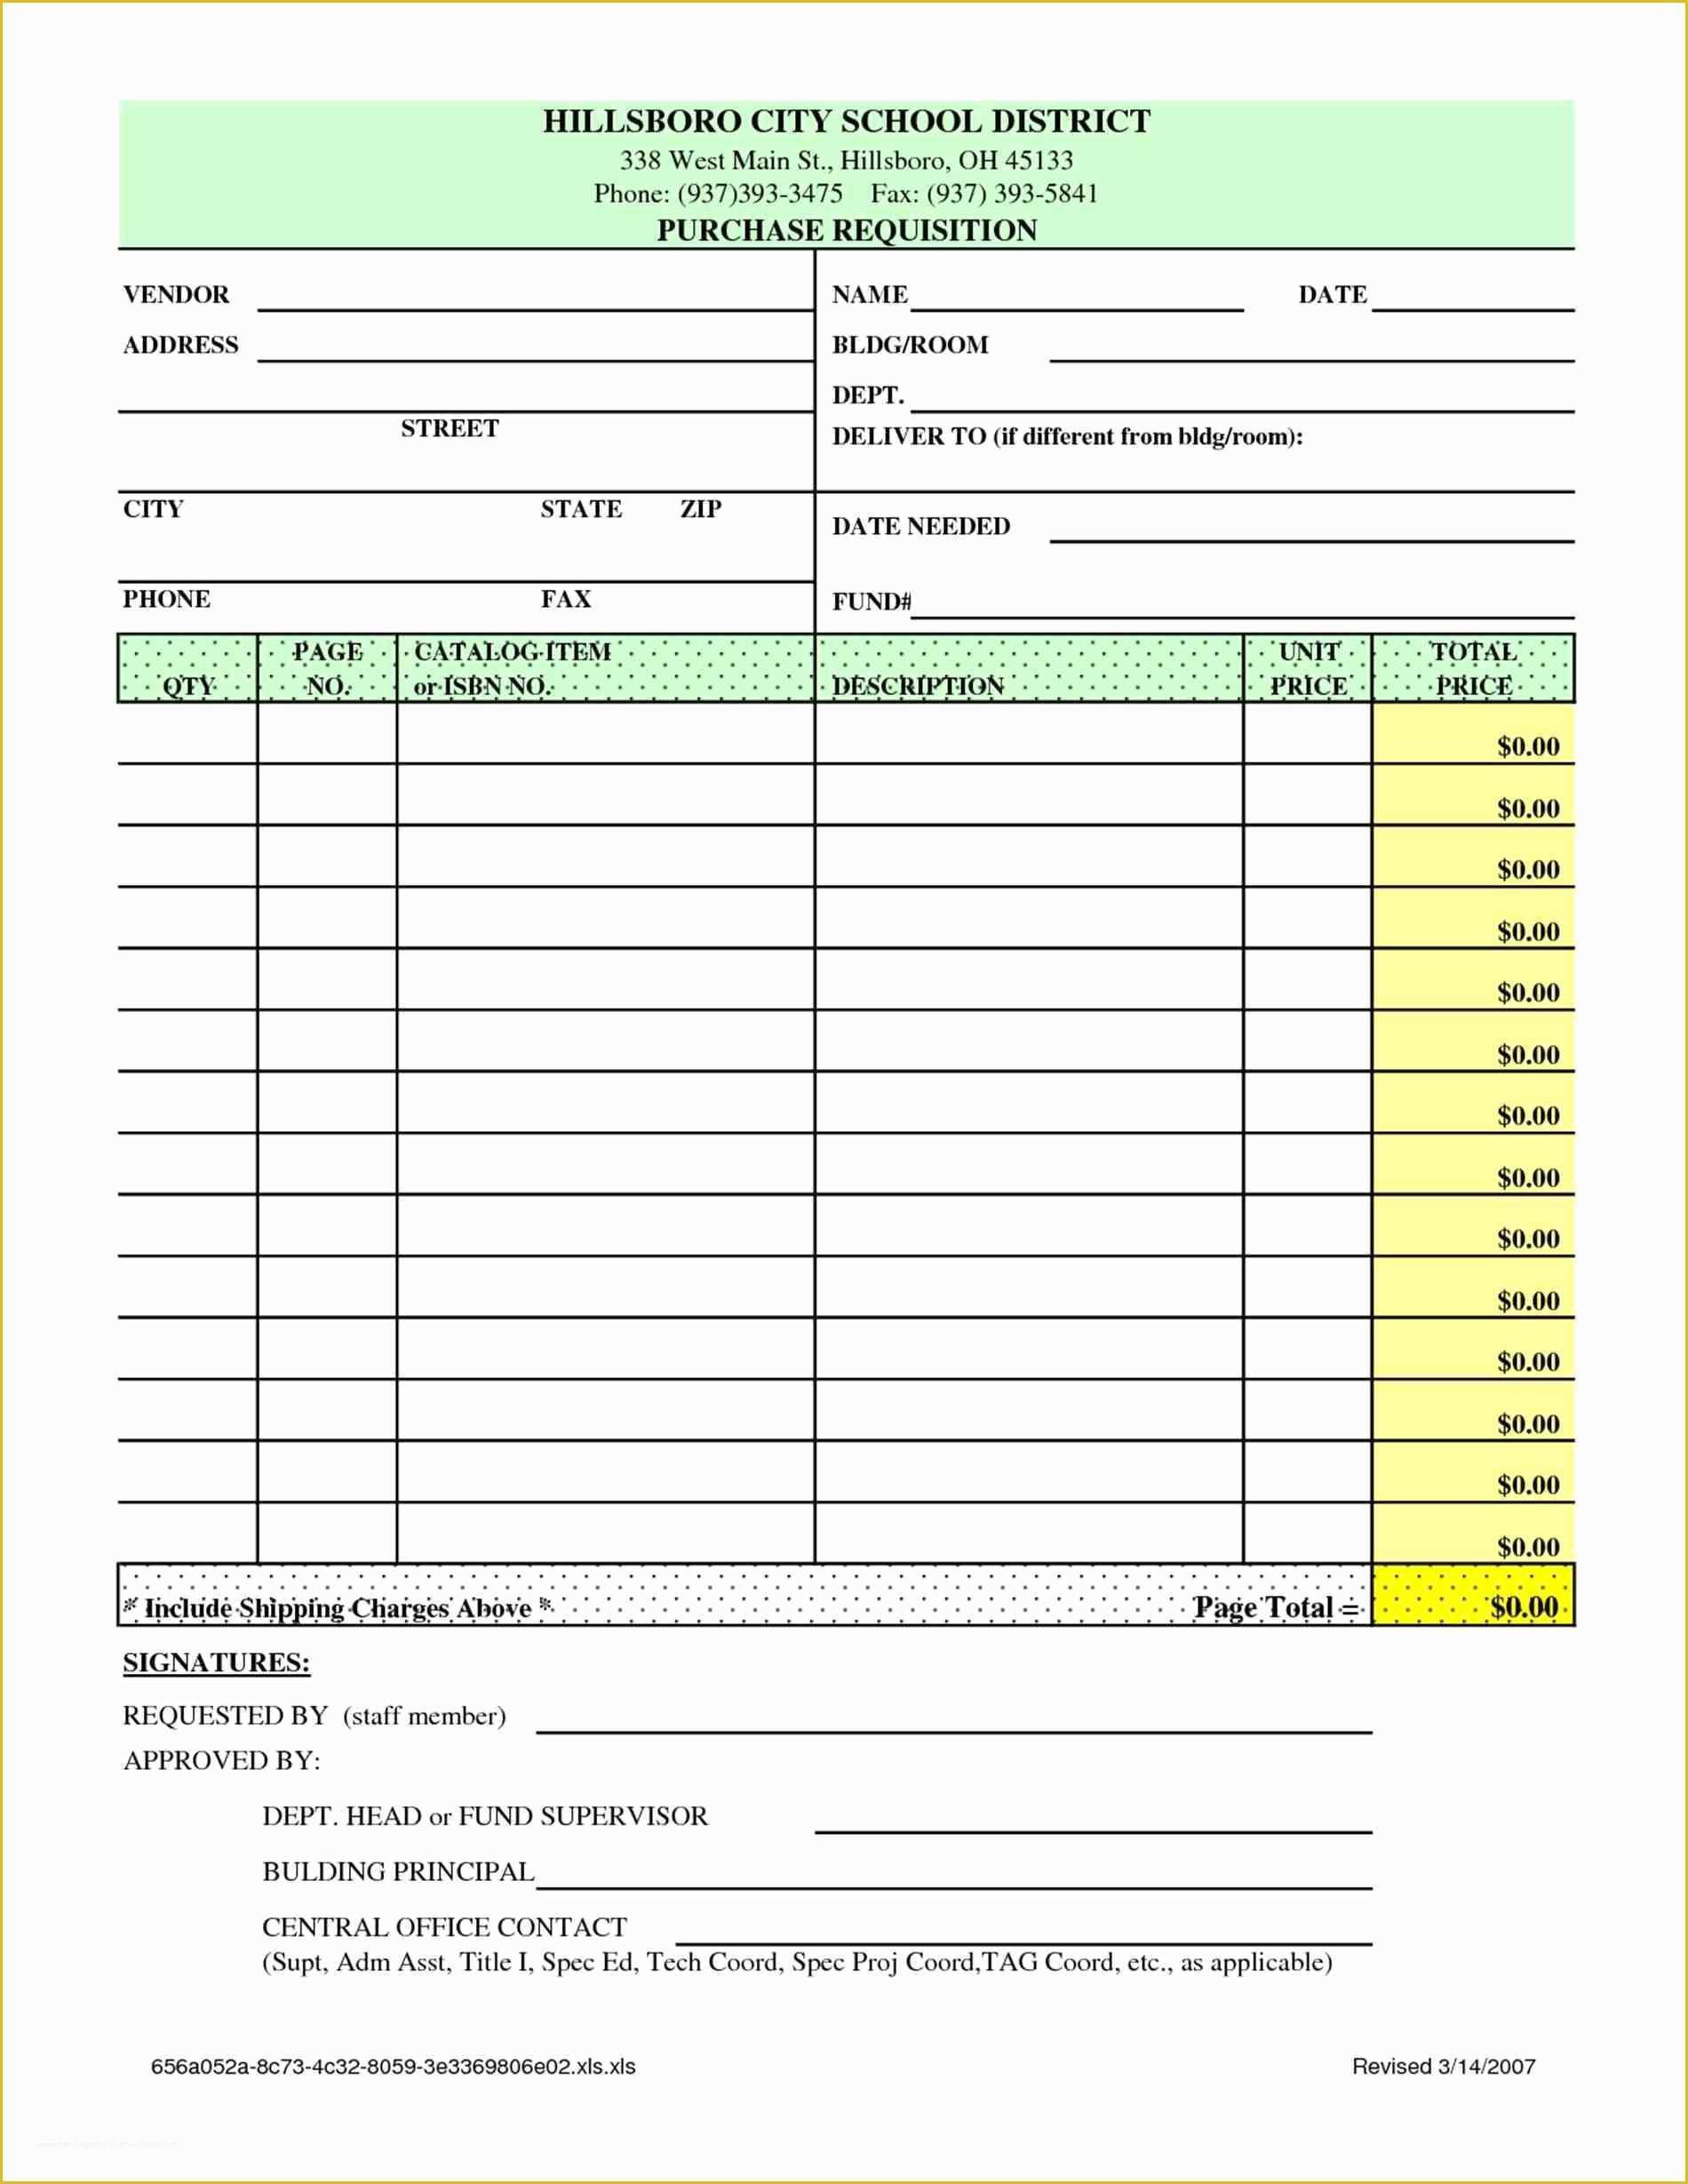 Free Requisition form Template Excel Of Material Request form Template Excel Ac848d7b0c50